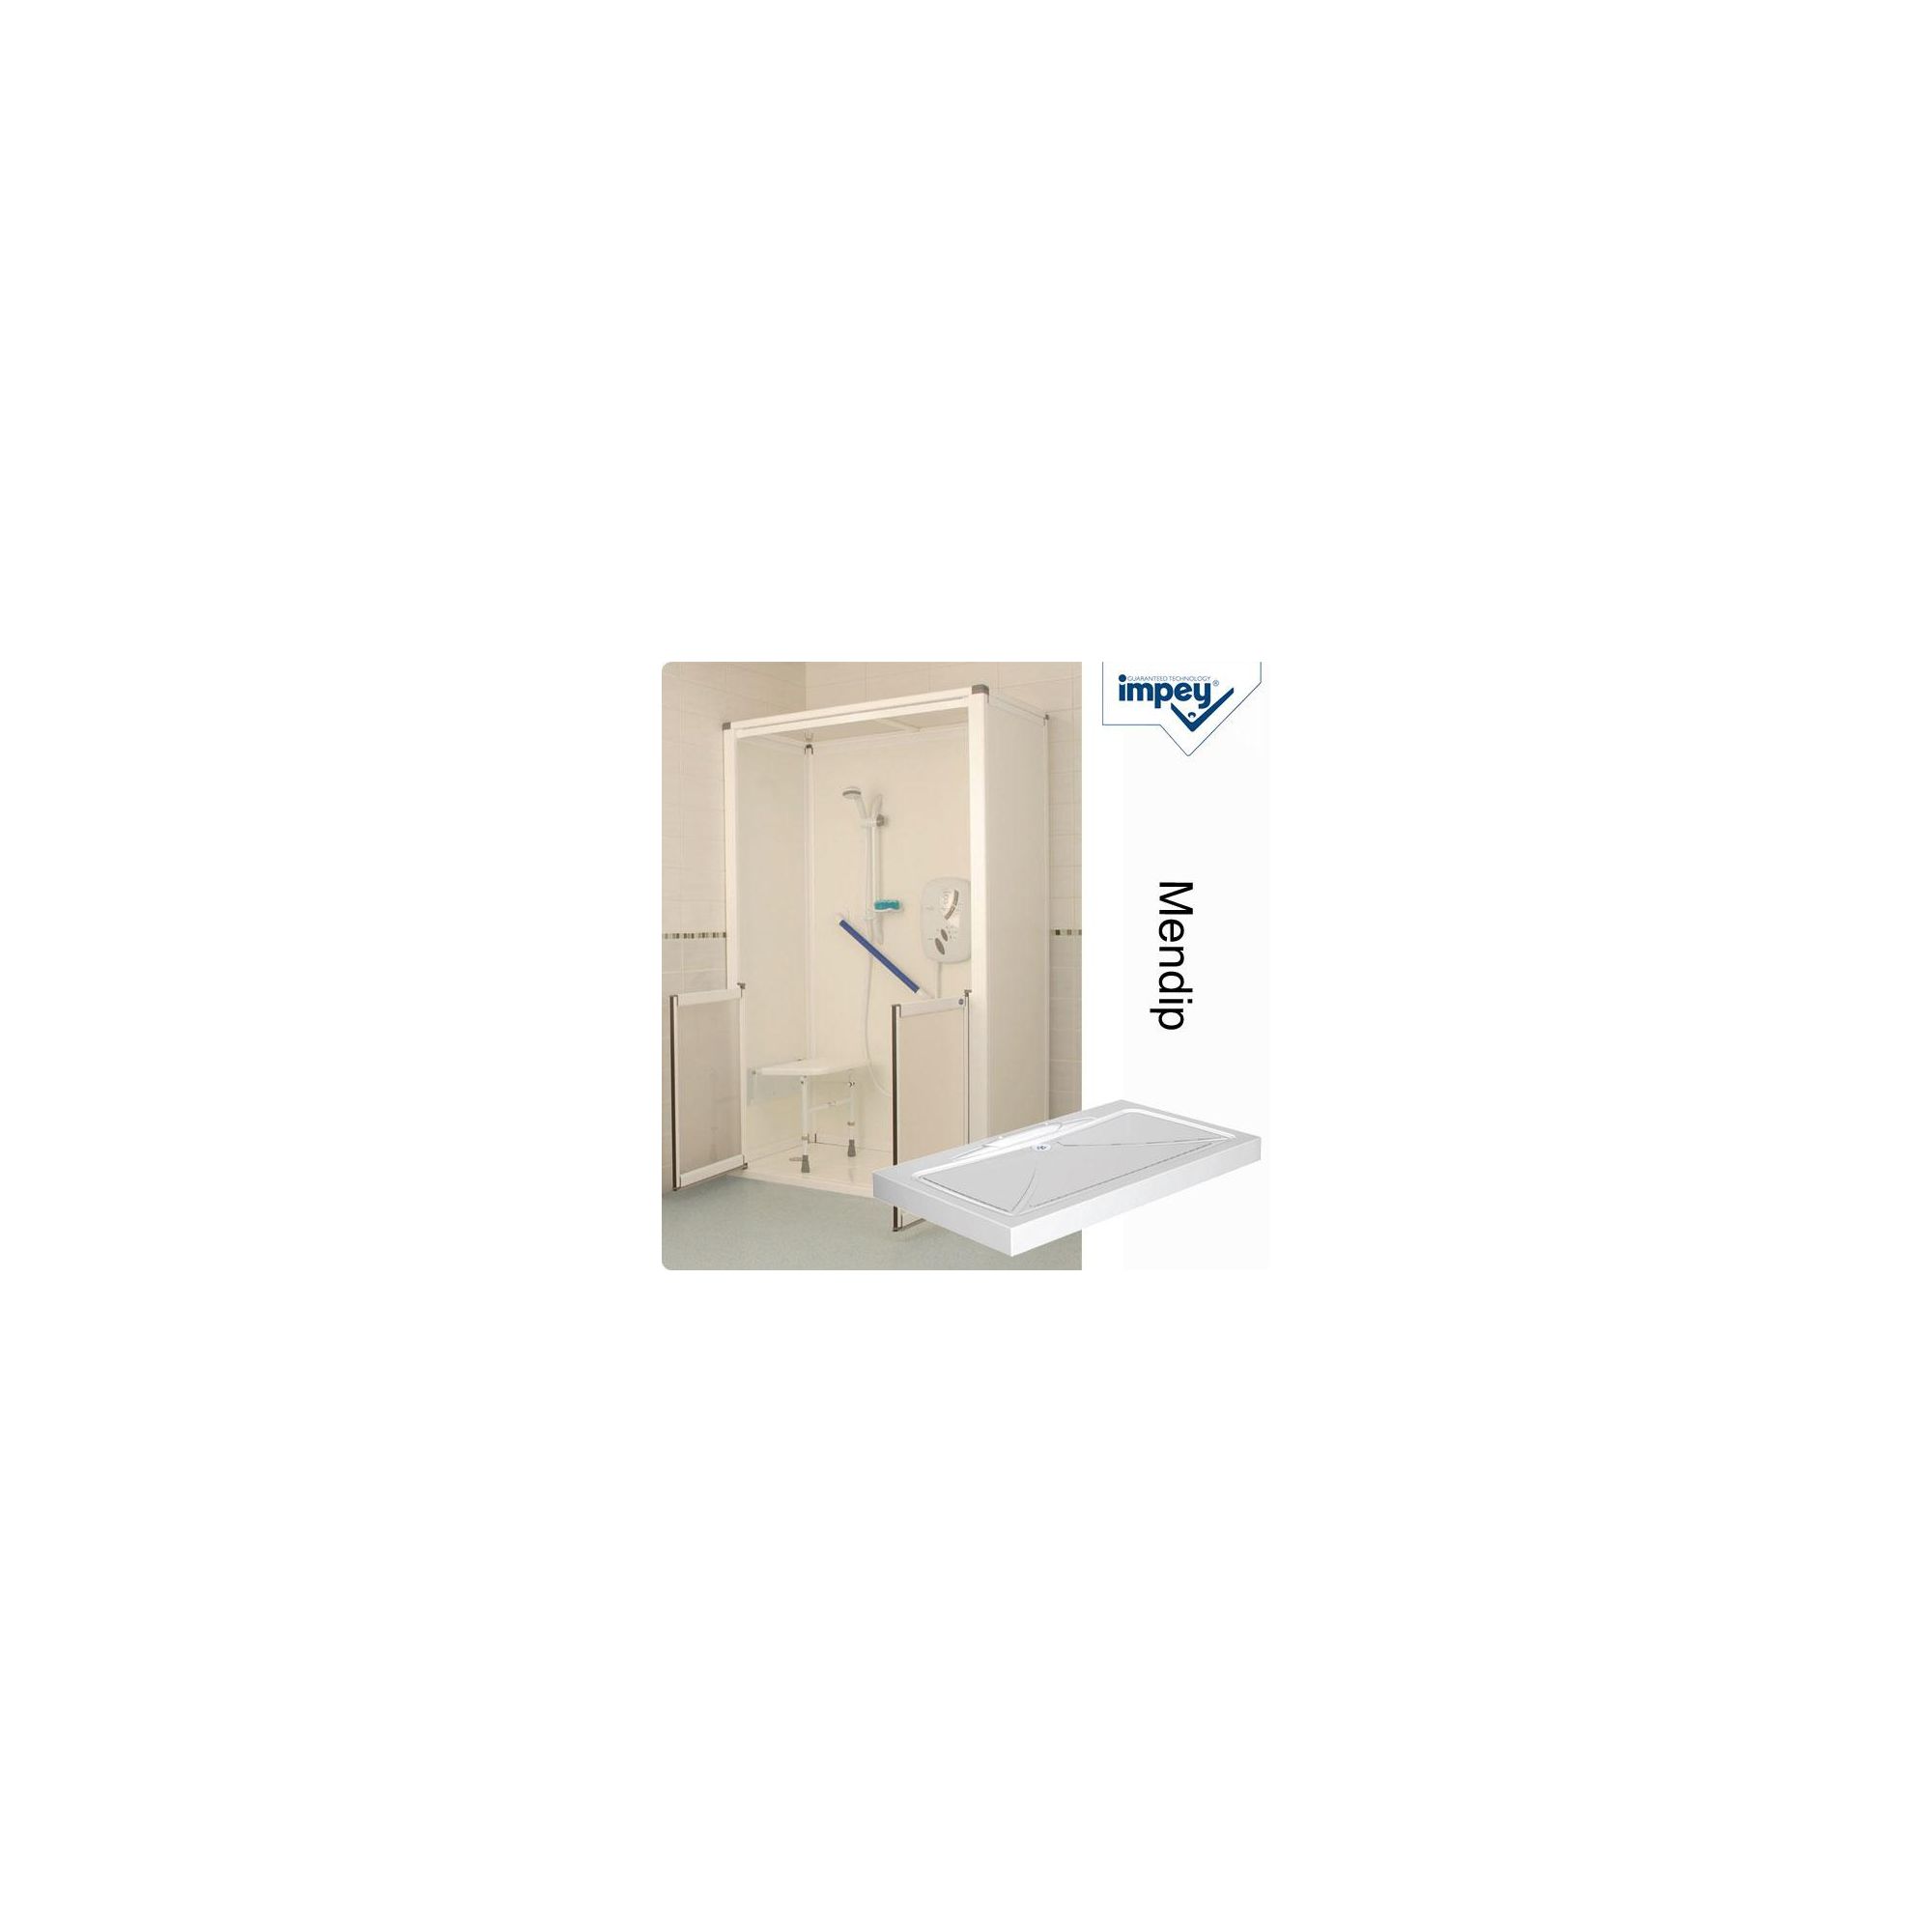 Impey Snowdon Swift-Fit Shower Cubicle with Mendip Shower Tray at Tesco Direct